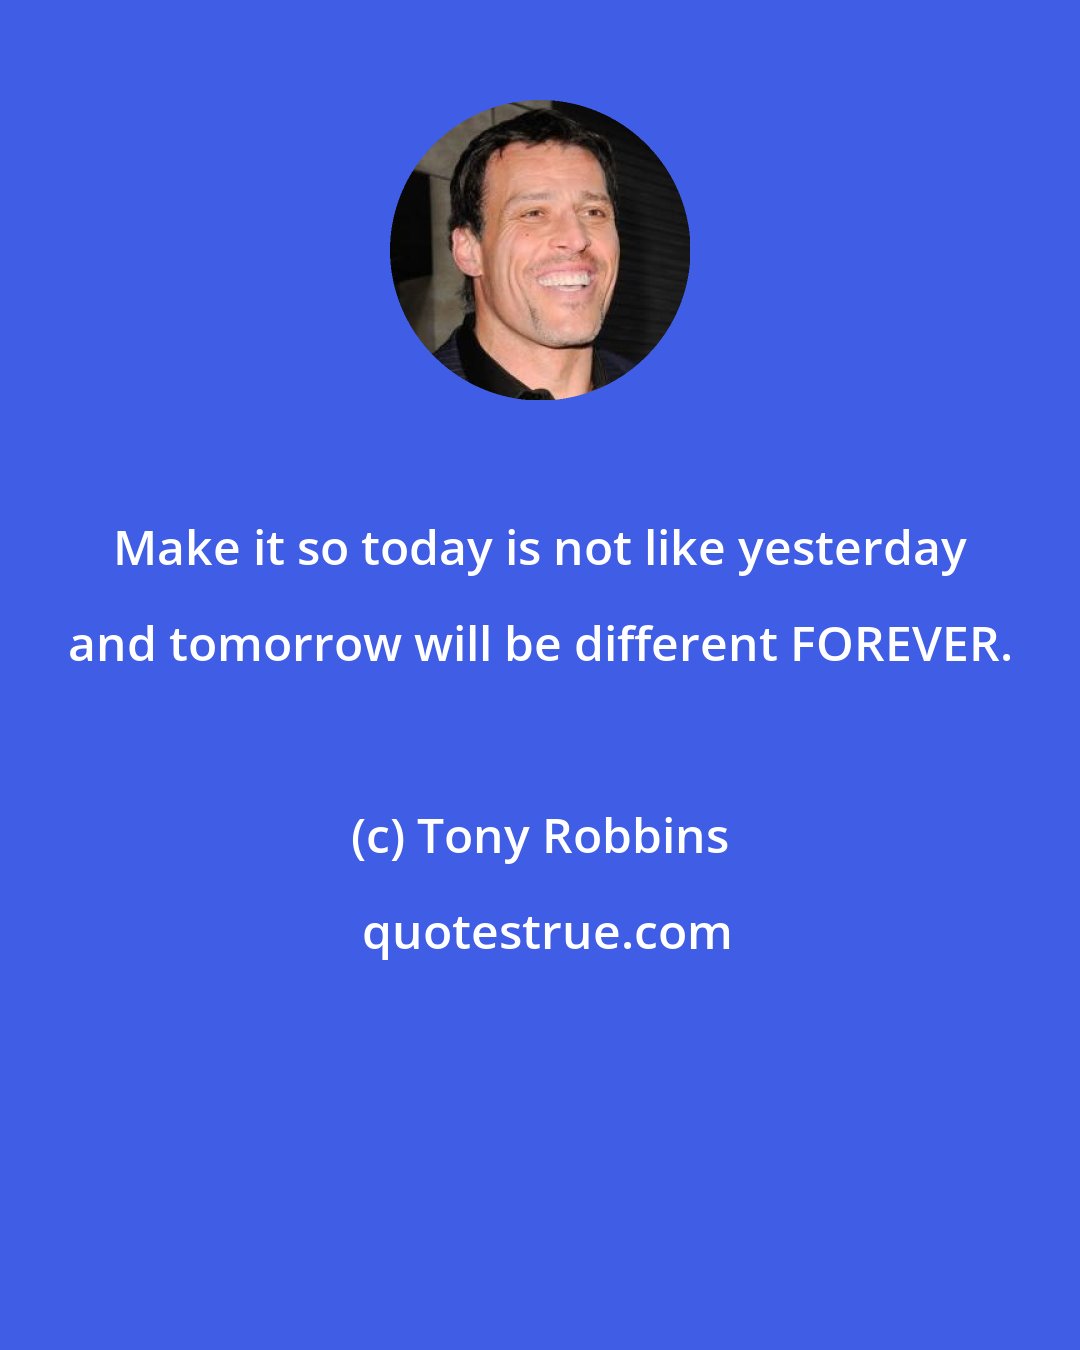 Tony Robbins: Make it so today is not like yesterday and tomorrow will be different FOREVER.